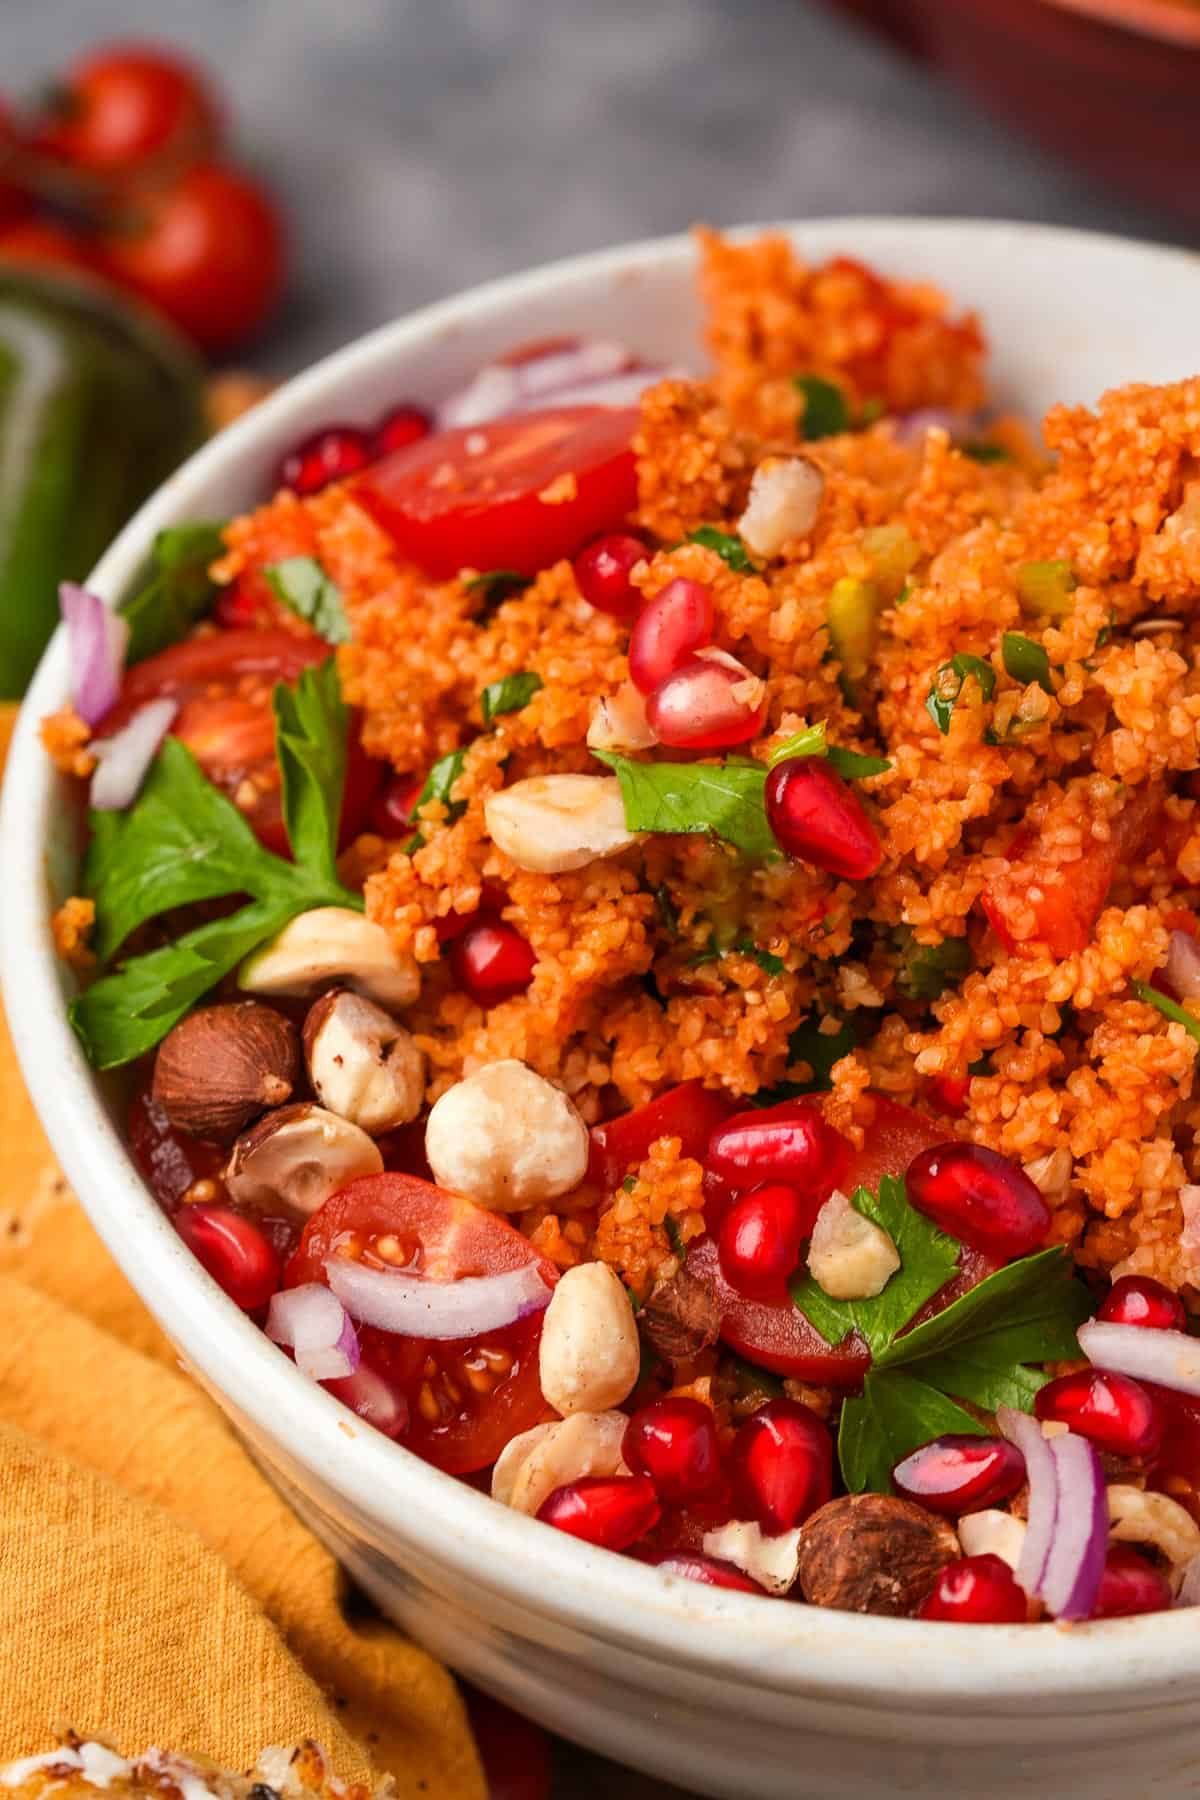 A bowl of kisir bulgur salad with tomatoes, herbs, and nuts.